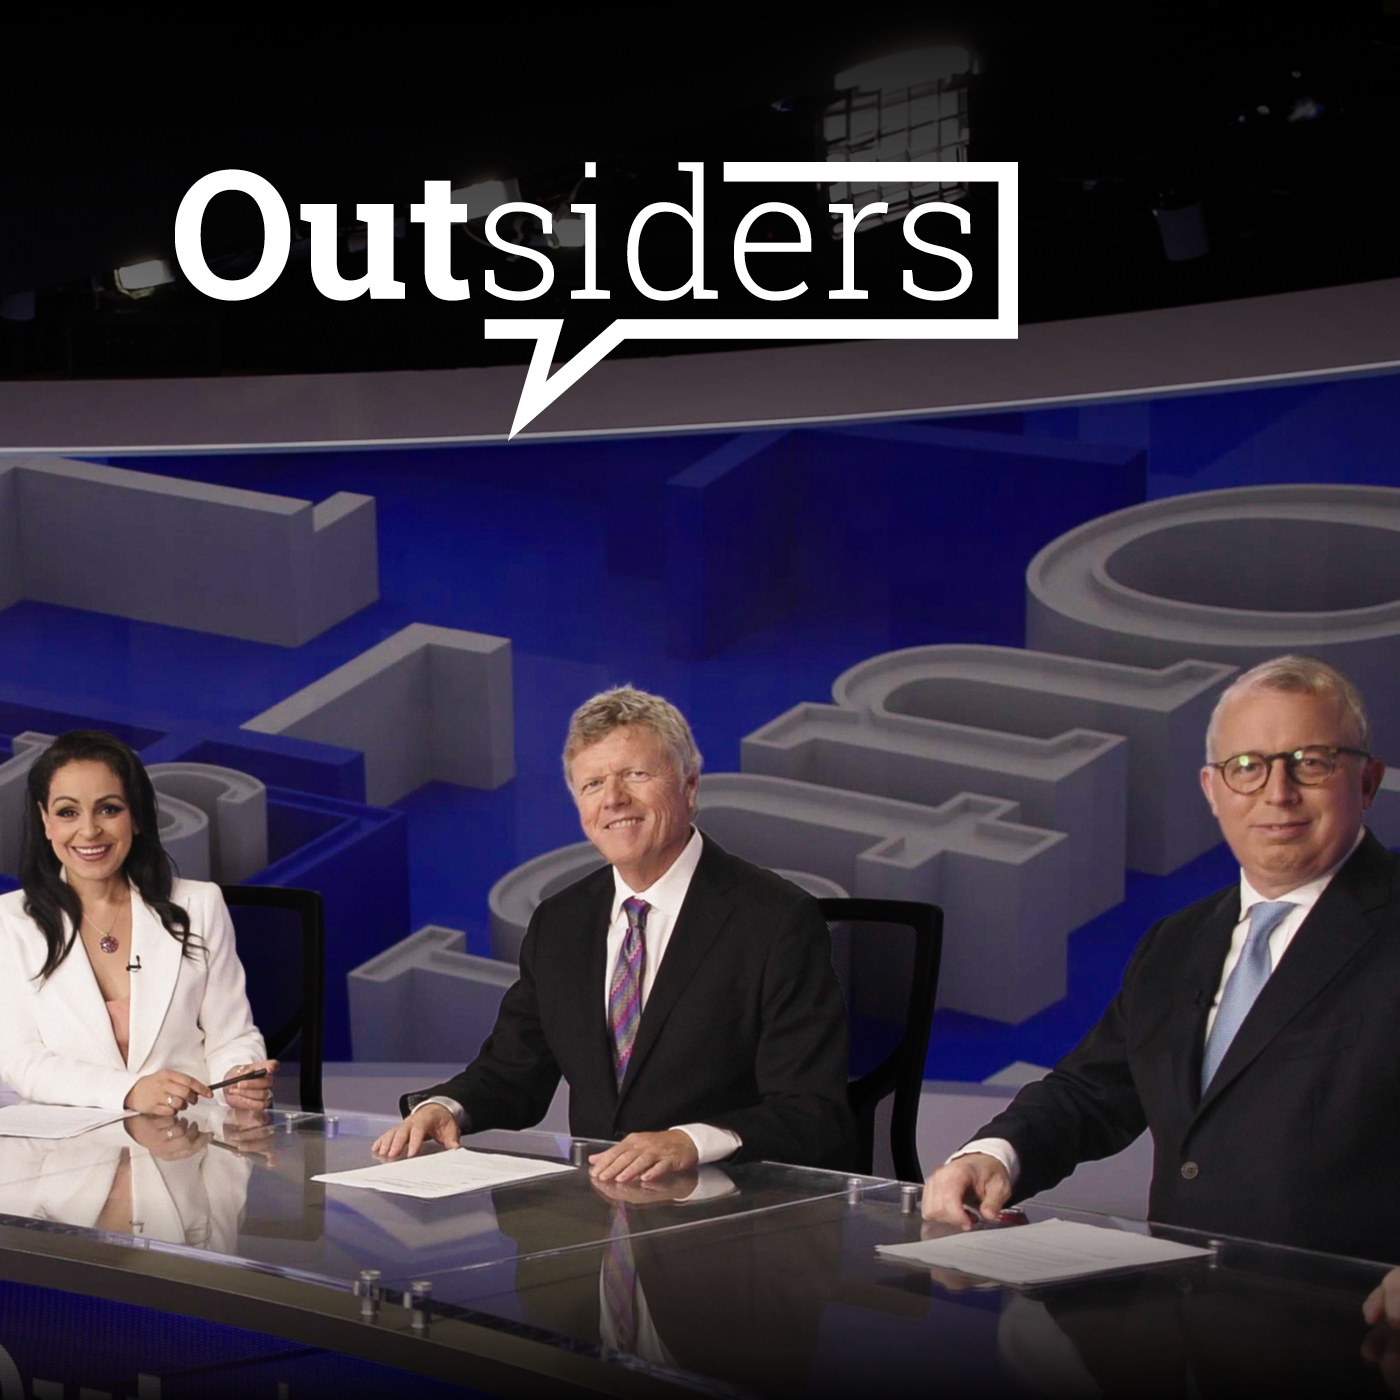 Outsiders, Sunday 9th December